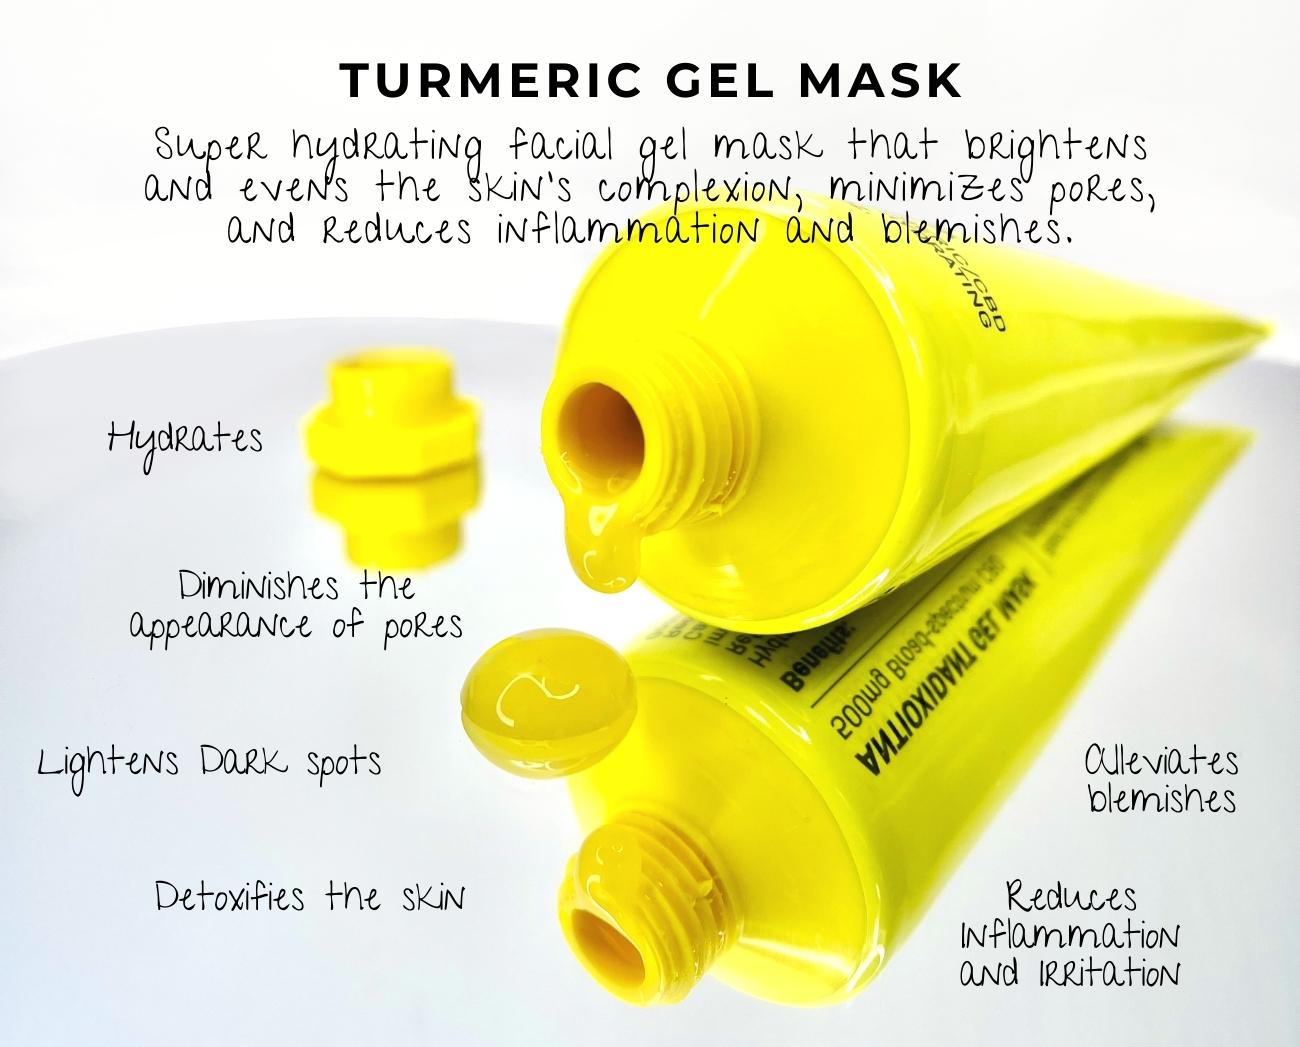 Turmeric Gel Mask For Brighter Days